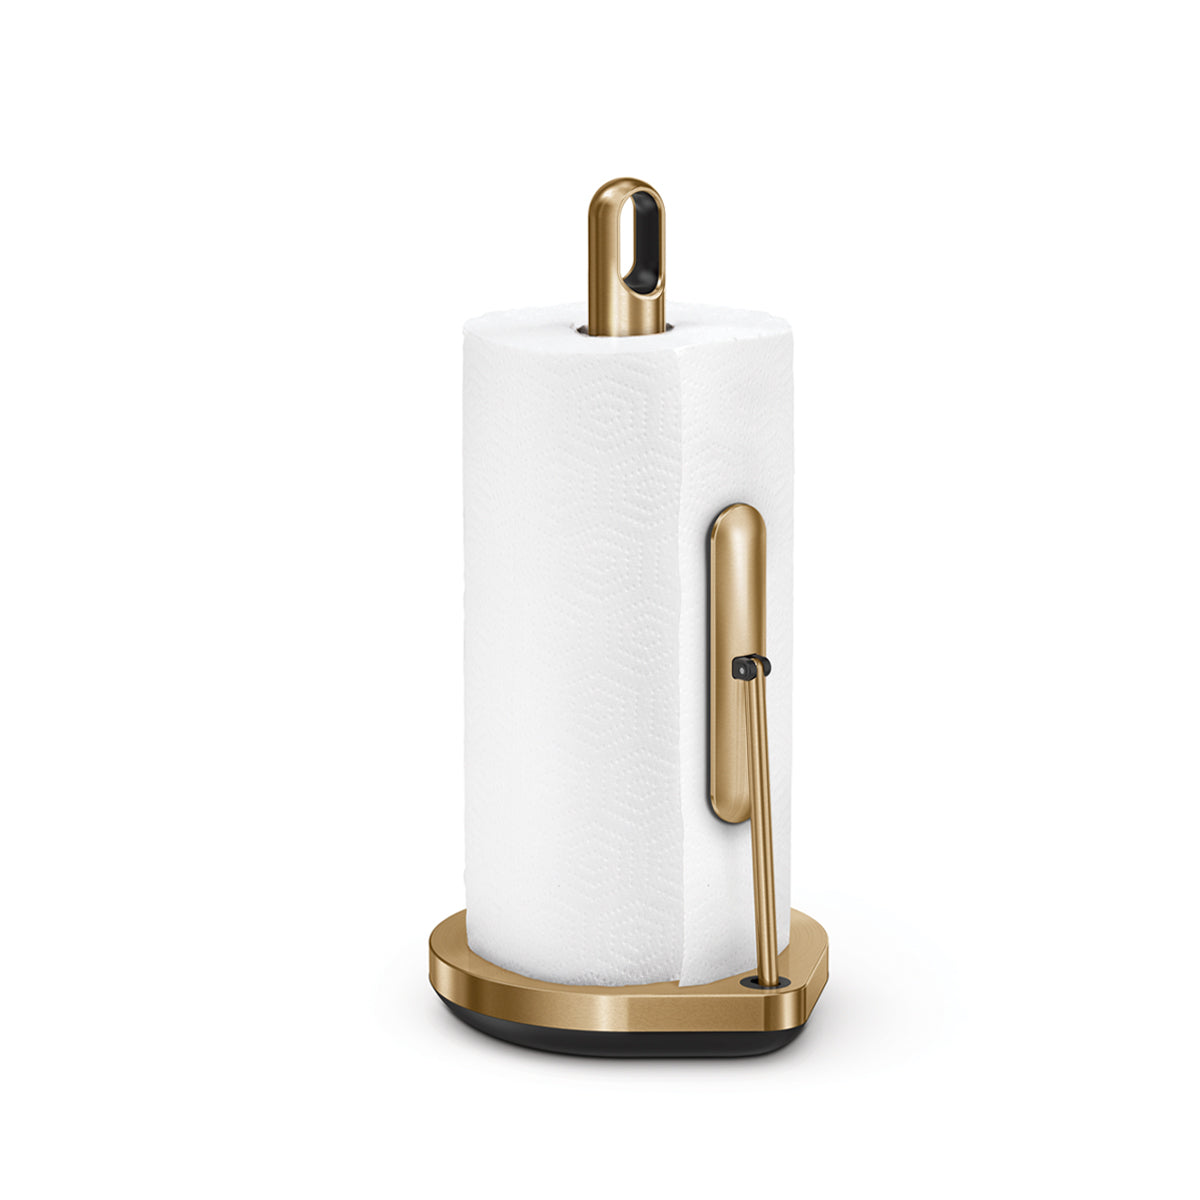 tension arm paper towel holder - countertop / brass